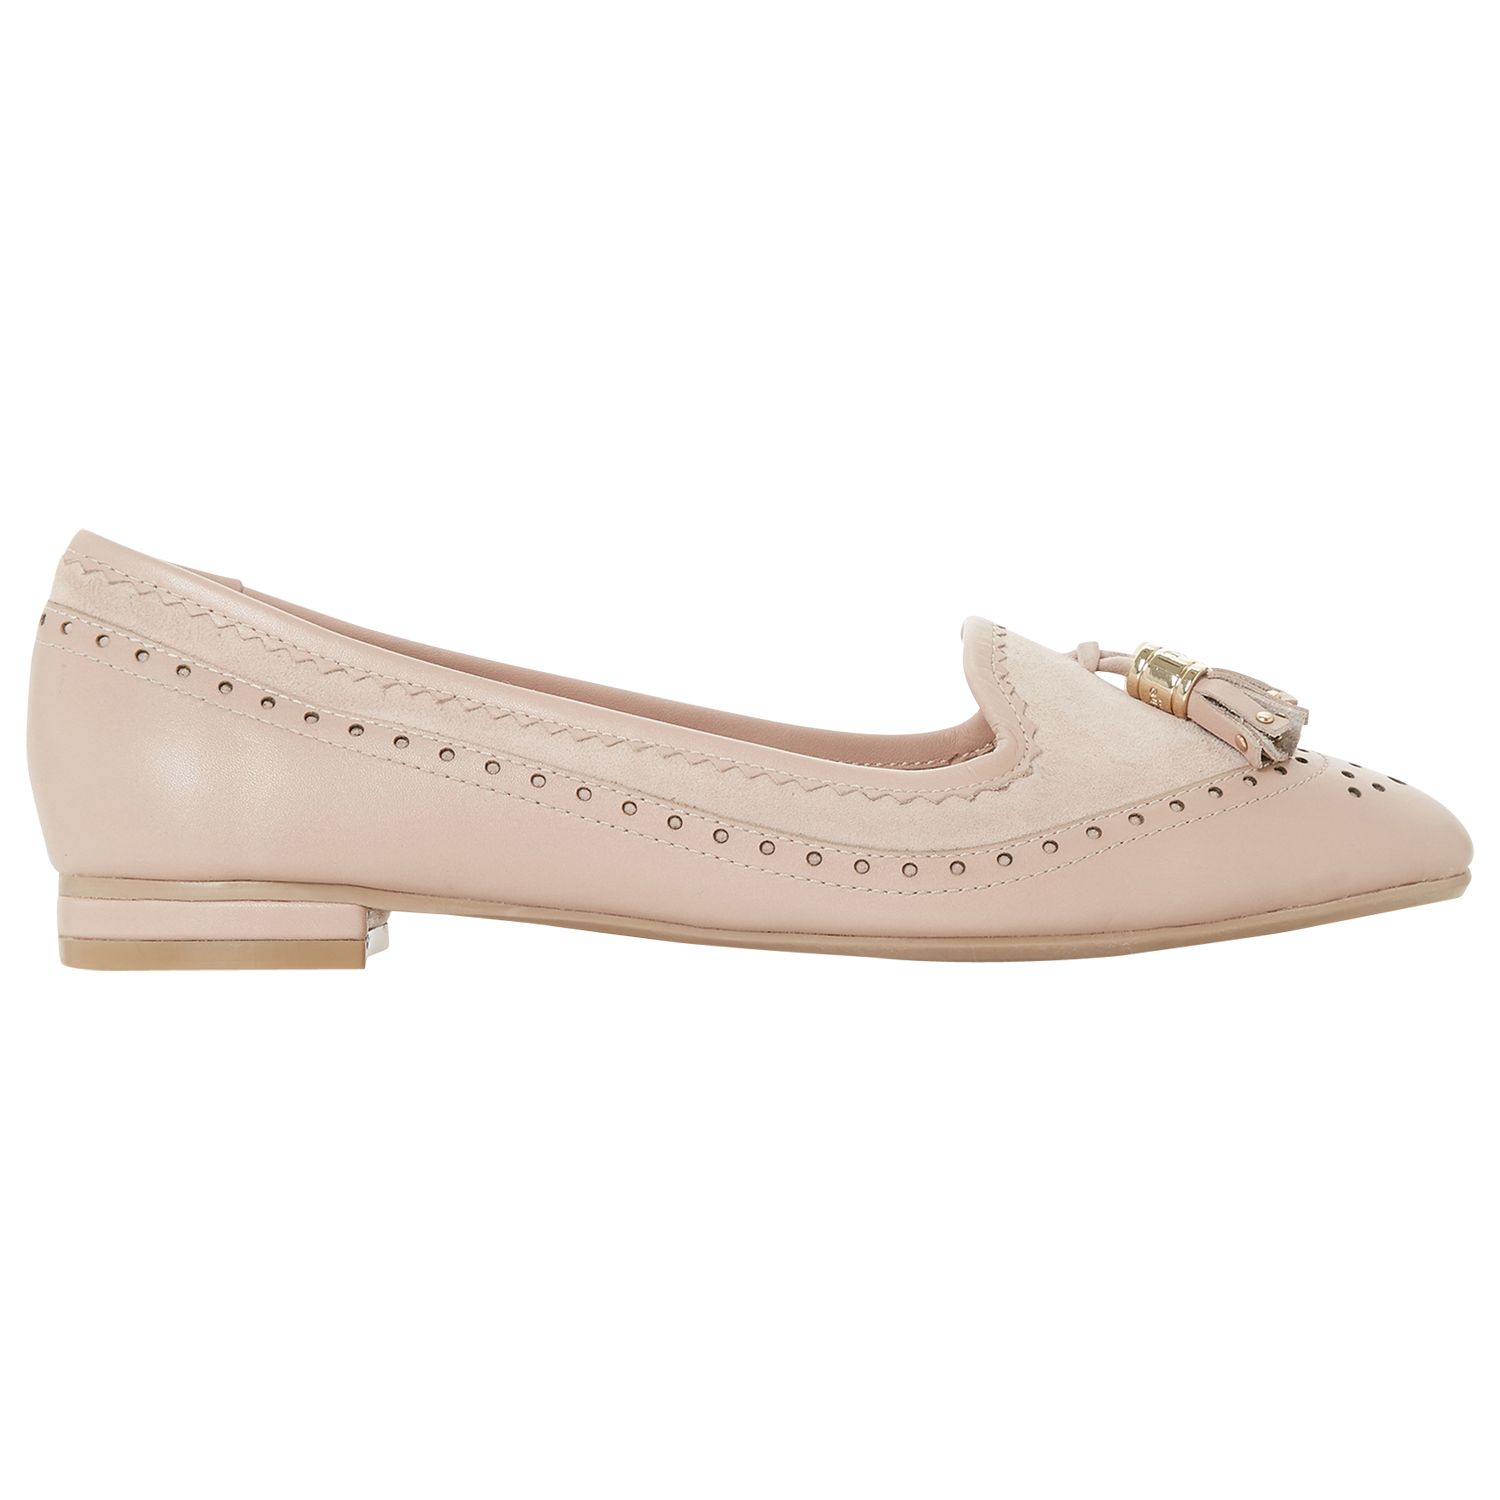 Dune Gambie Leather Loafers, Blush, 6